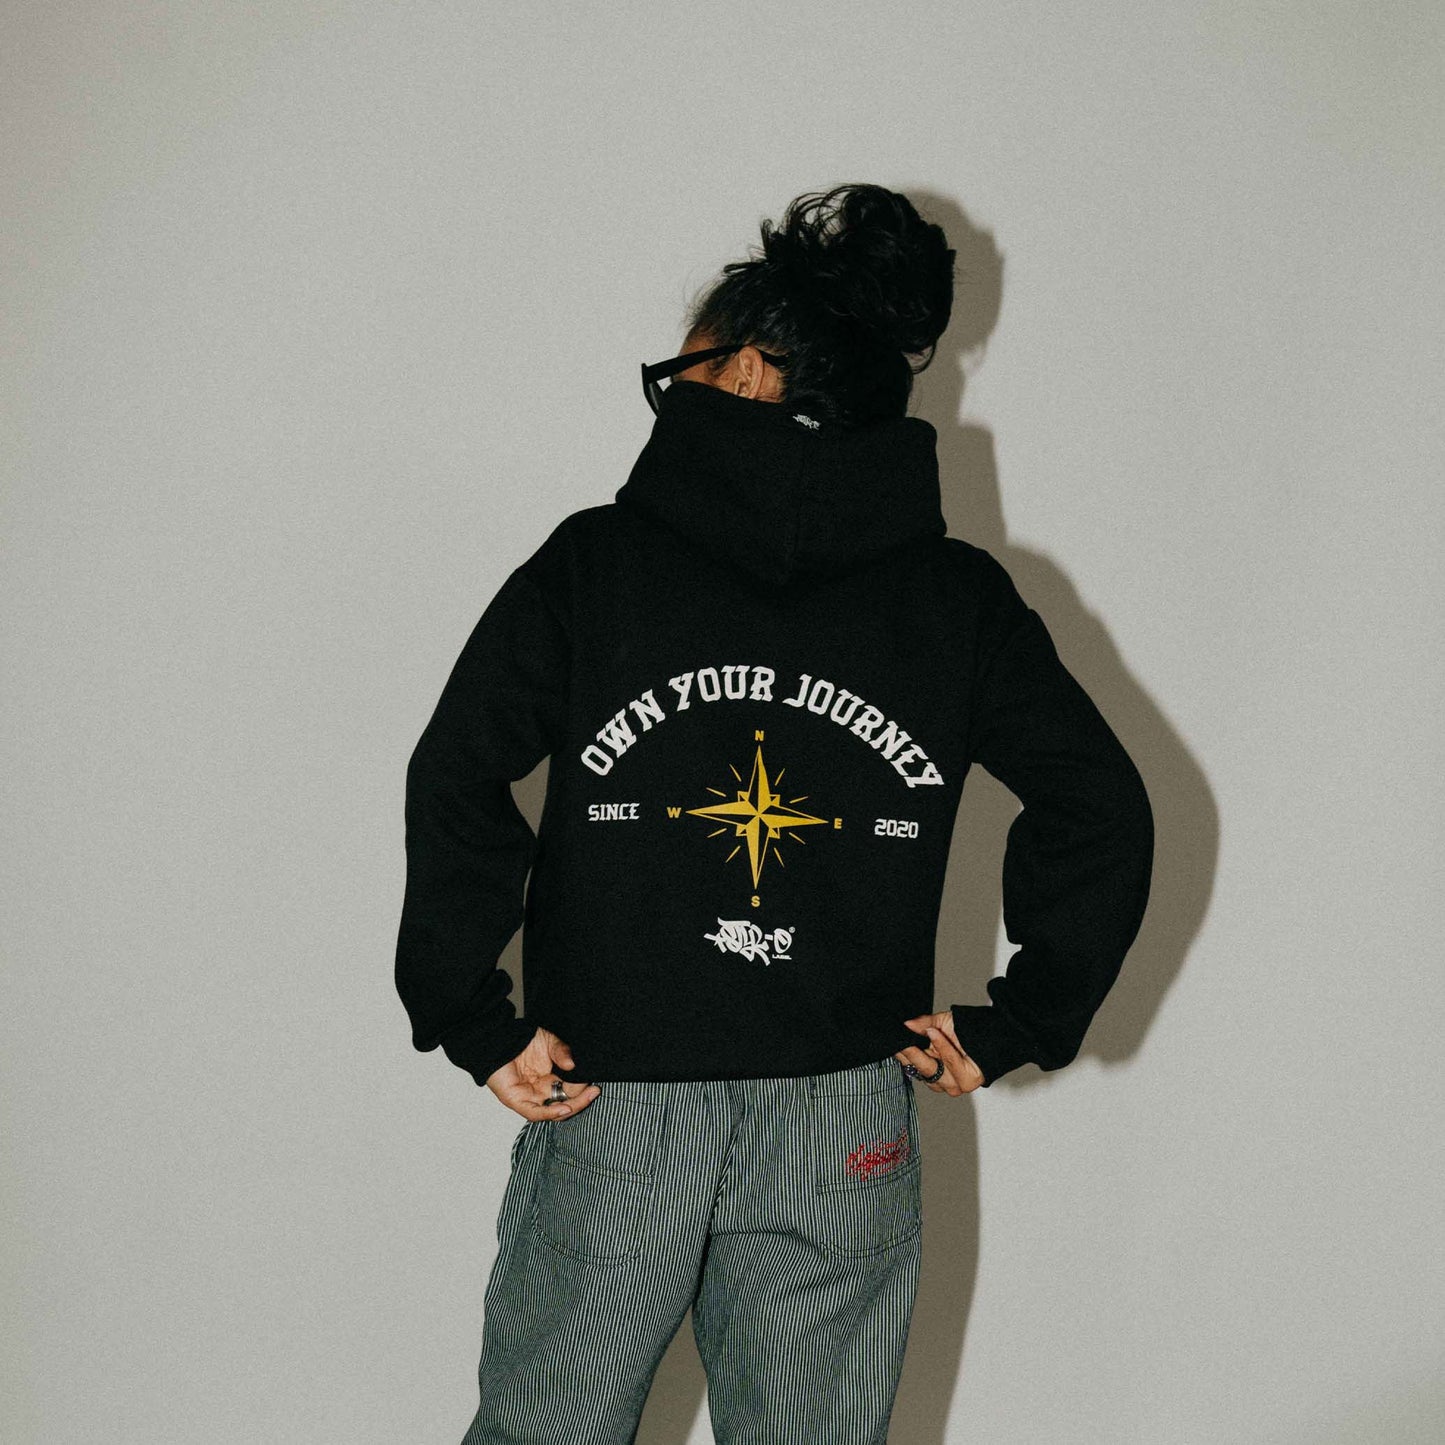 Own Your Journey Hoodie